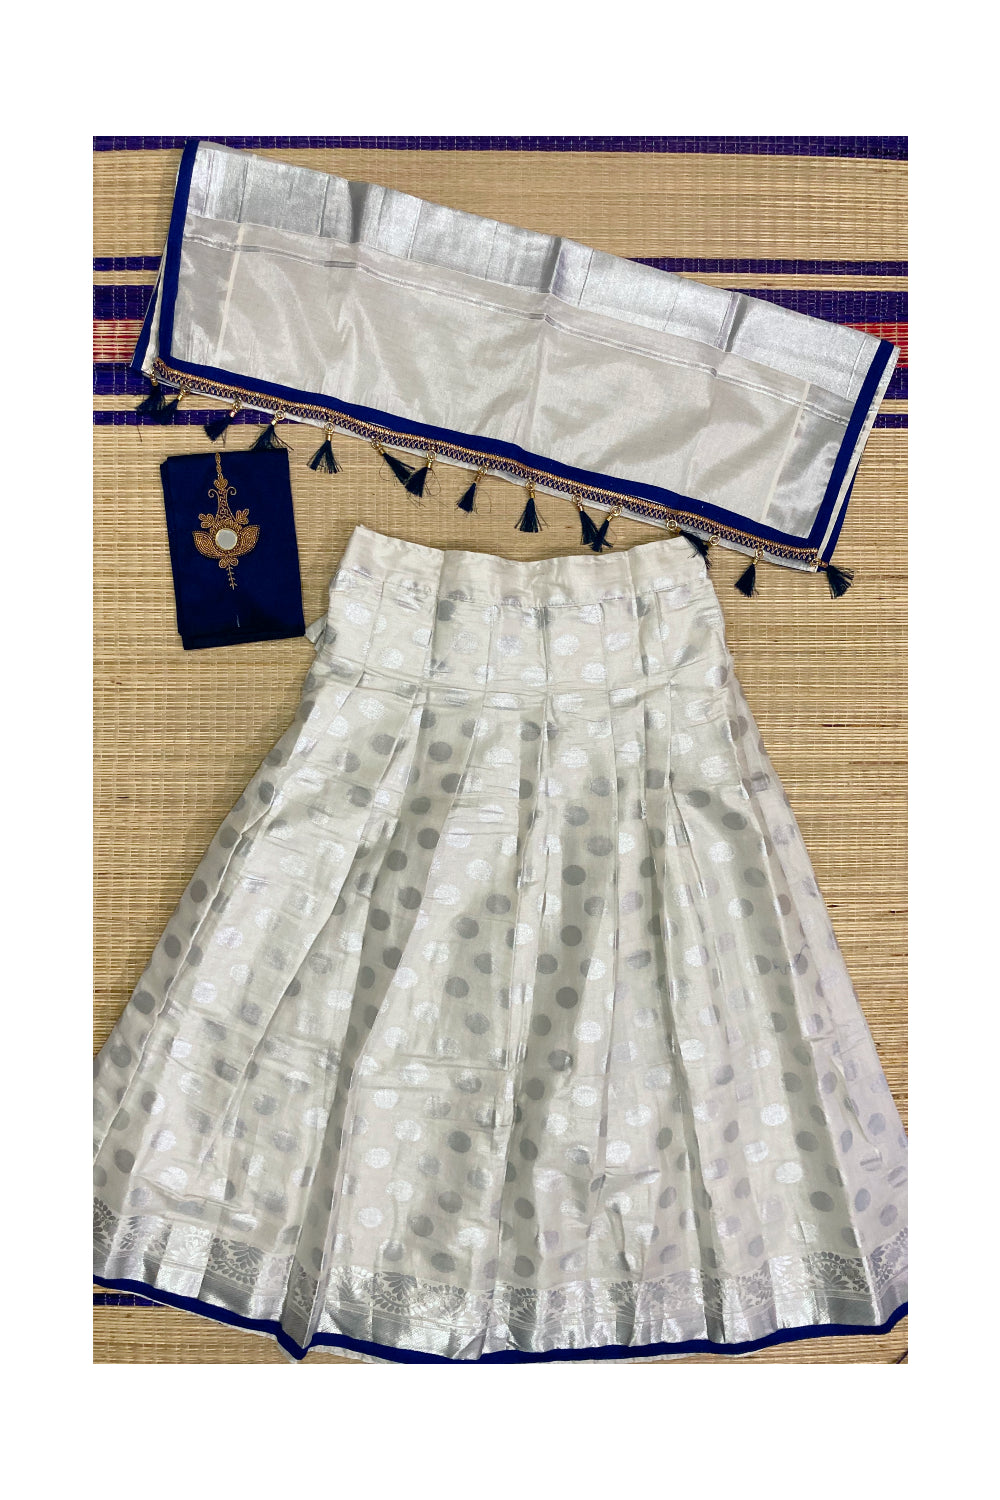 Kerala Silver Tissue Stitched Dhavani Set with Blue Blouse Piece and Neriyathu with Silver Polka Work